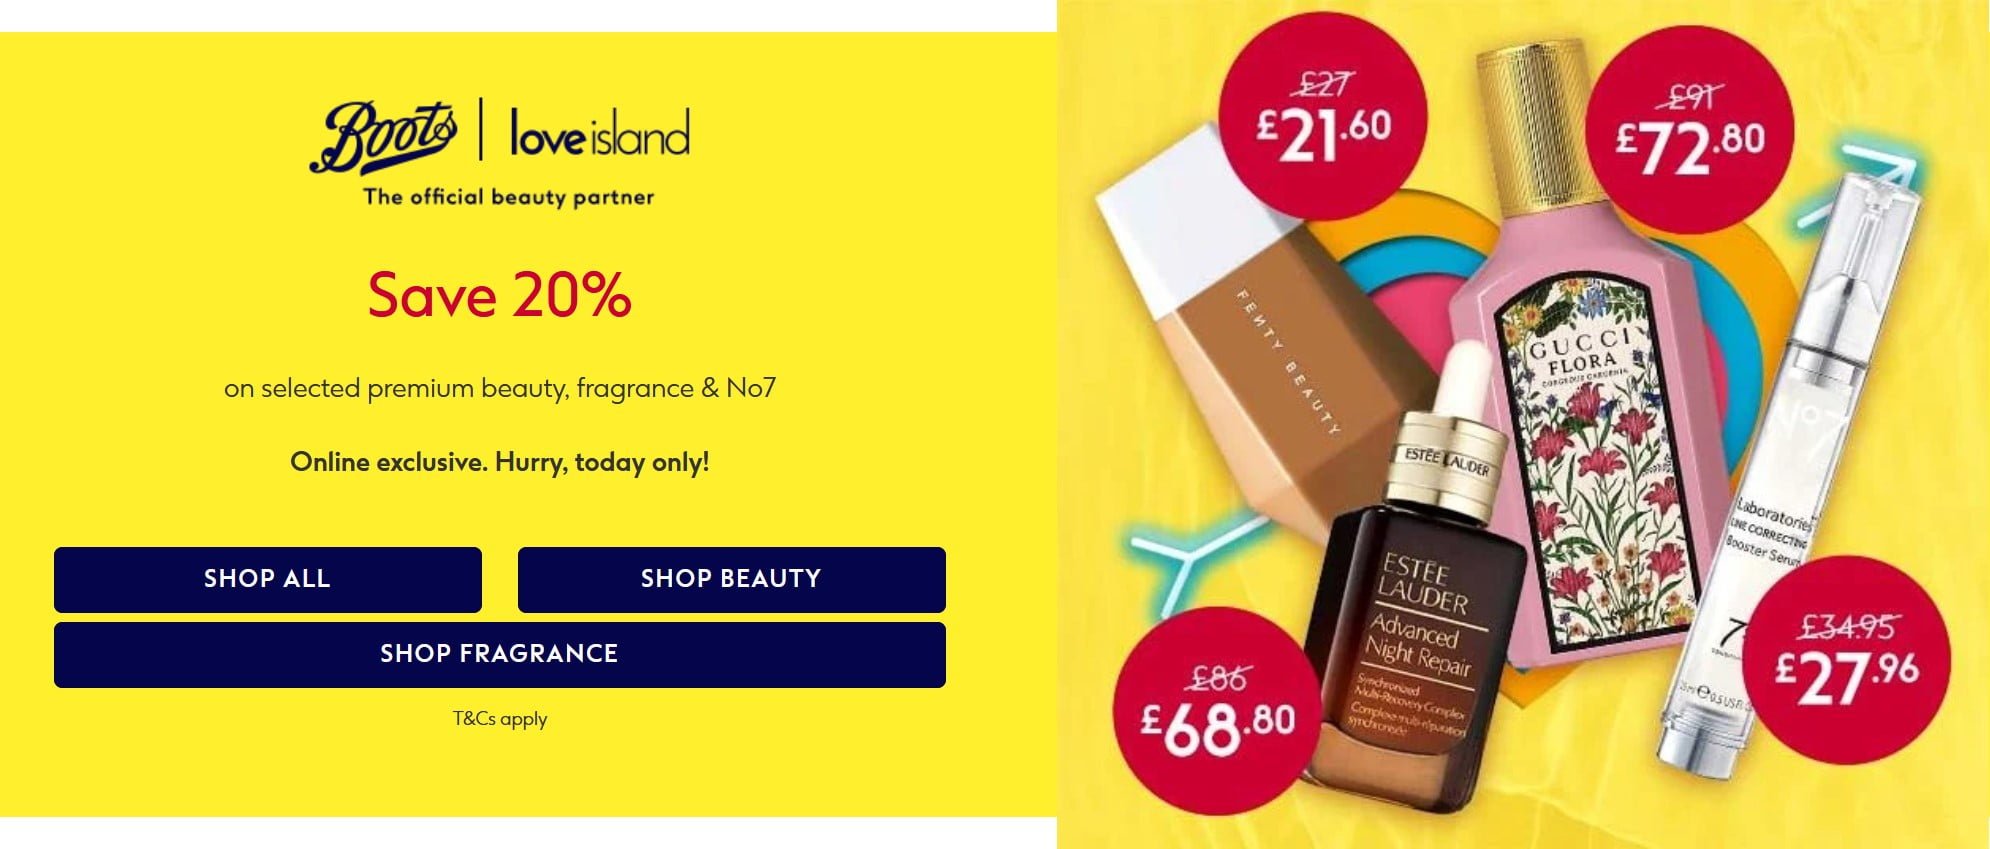 Save 20% on selected premium beauty, fragrance and No7 at Boots